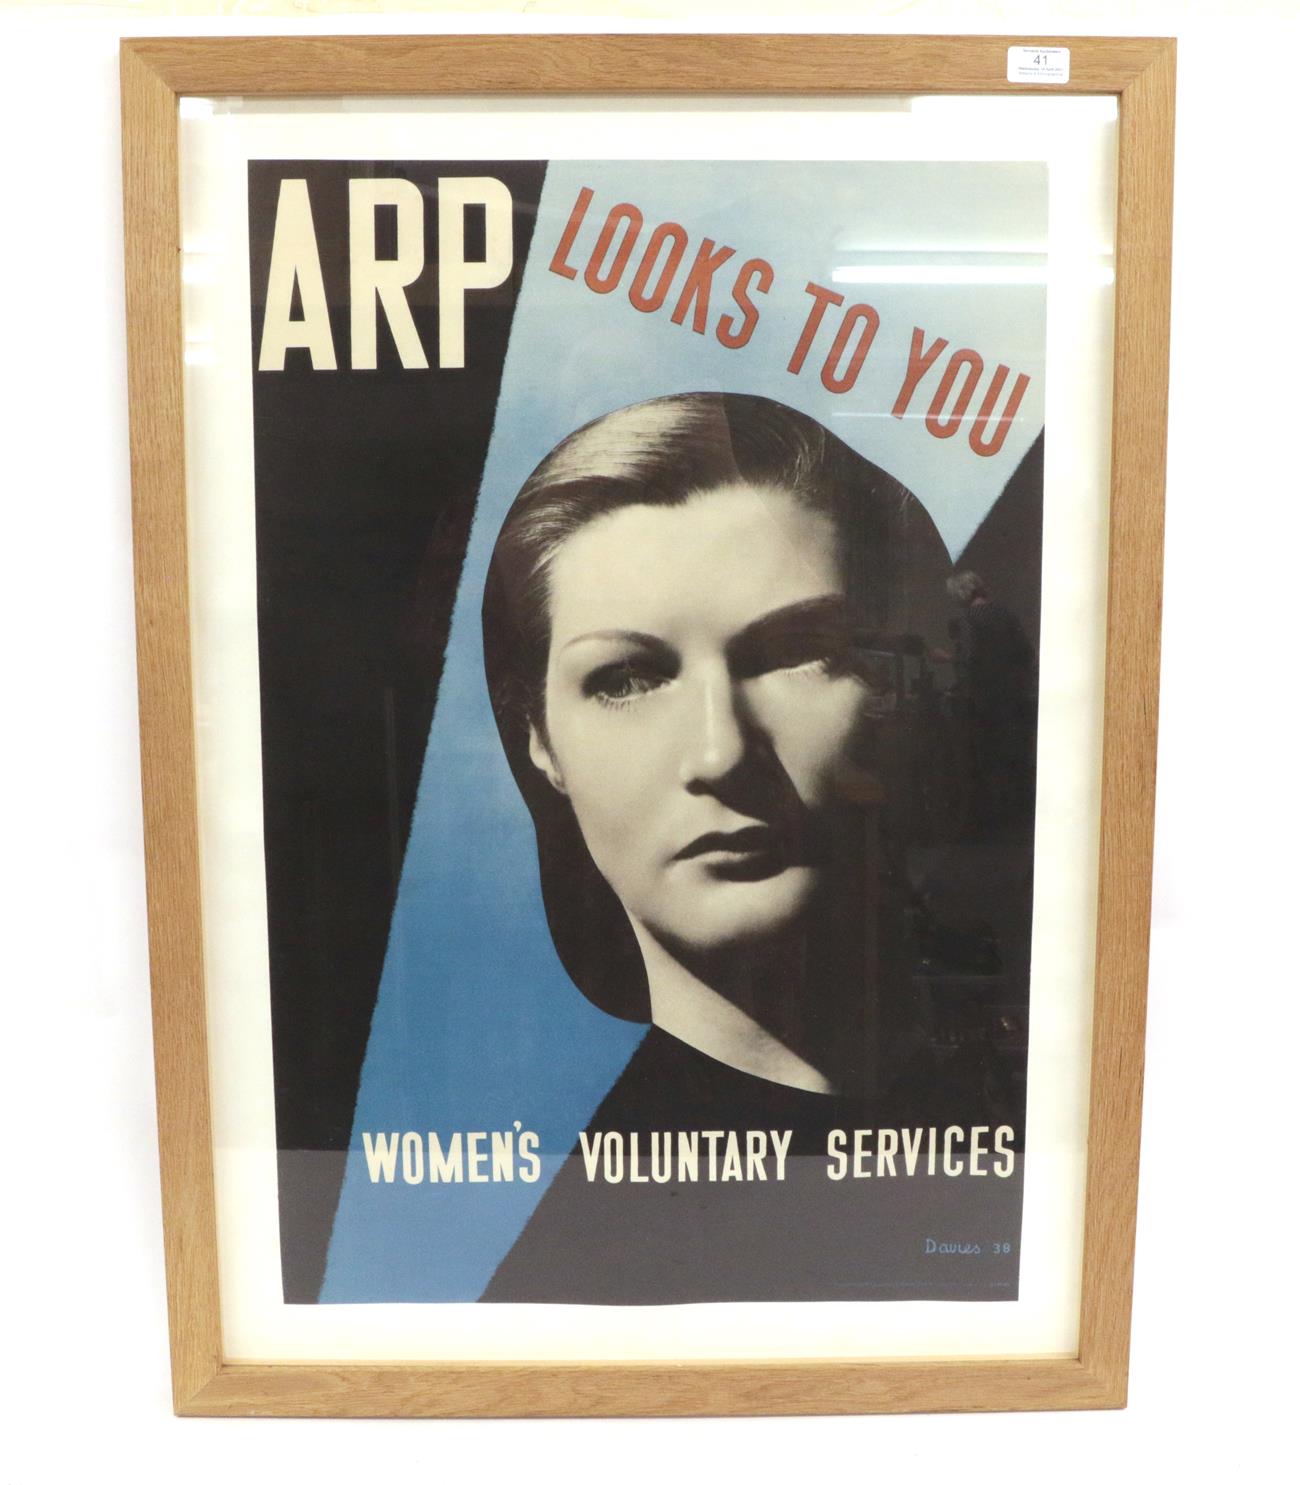 Lot 41 - A Second World War Air Raid Precaution Recruitment Poster Promoting the Women's Voluntary Services